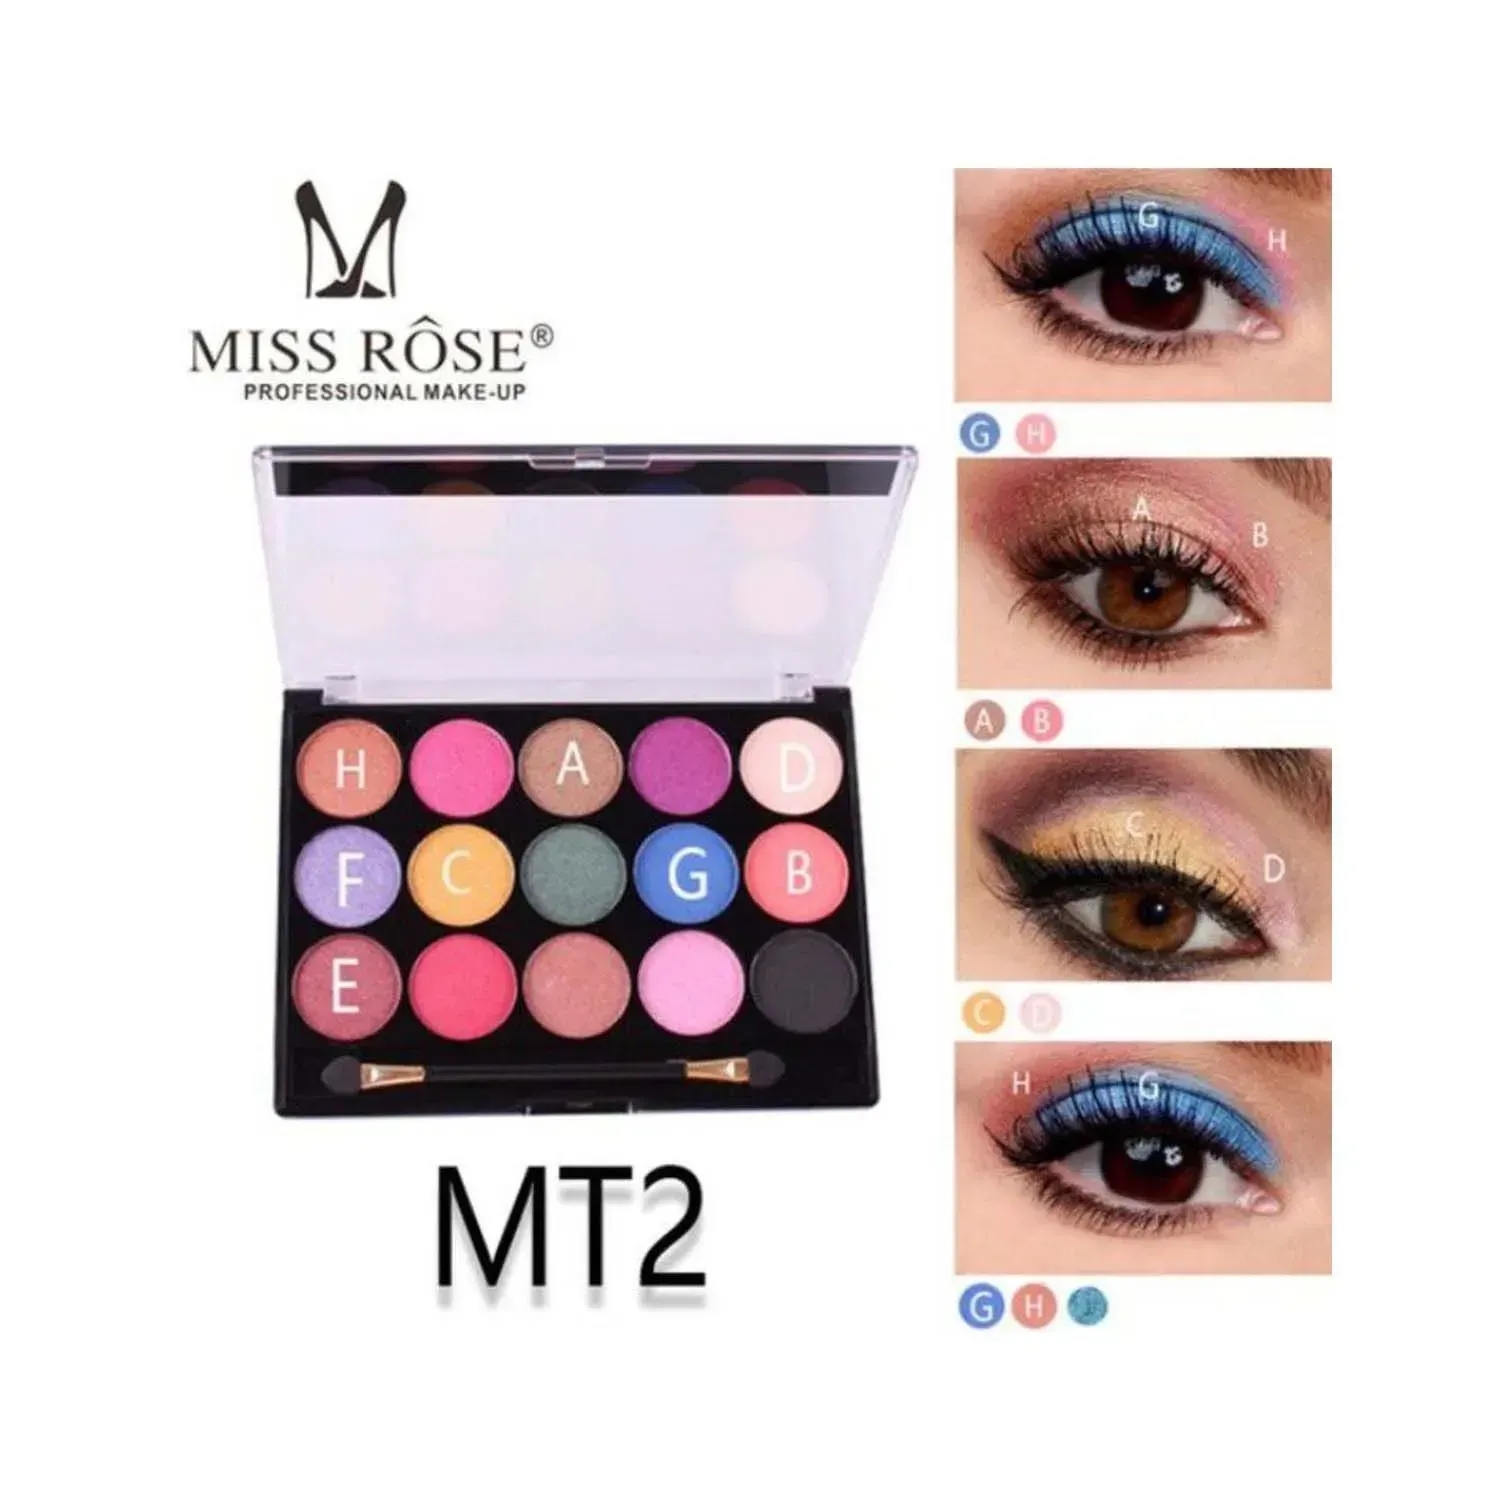 Miss Rose | Miss Rose 15 Color Glitter Eyeshadow Palette - 02 Shade (15g)